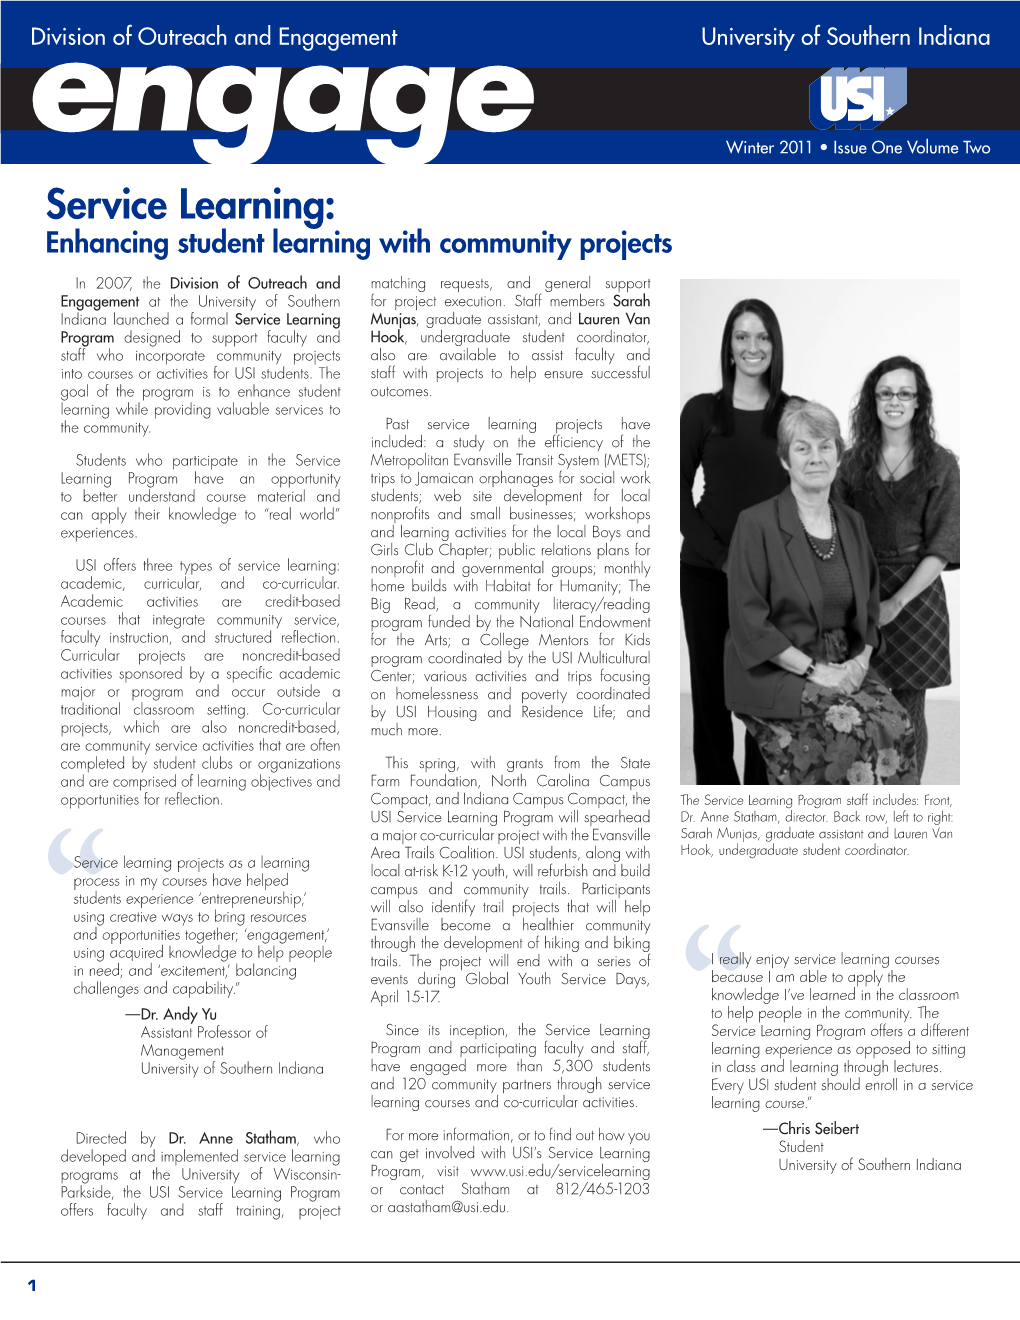 Service Learning: Enhancing Student Learning with Community Projects